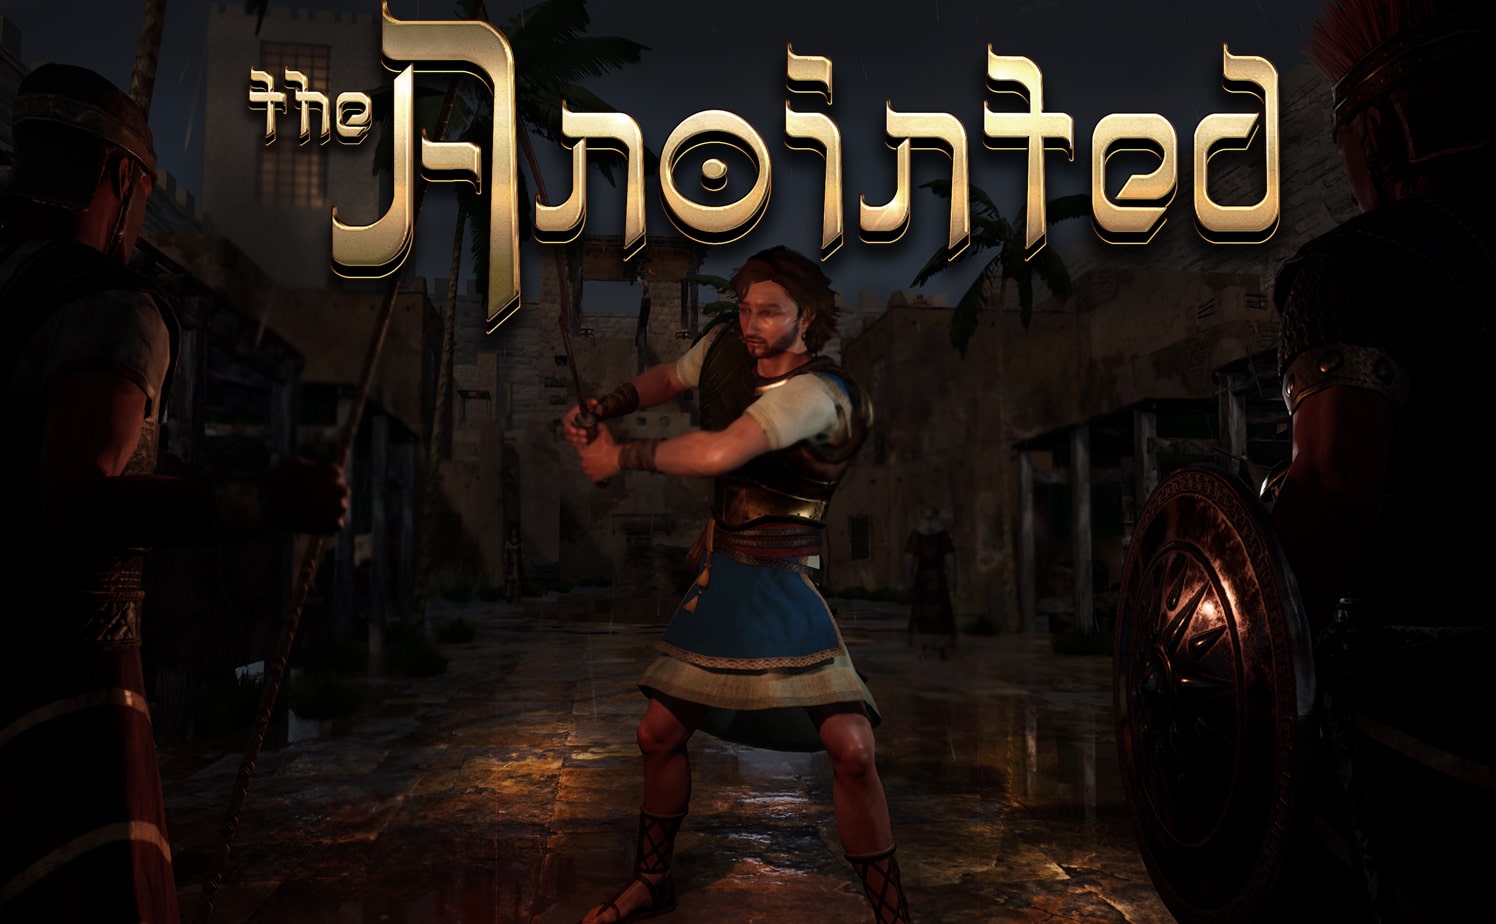 The Anointed: A Bible based game